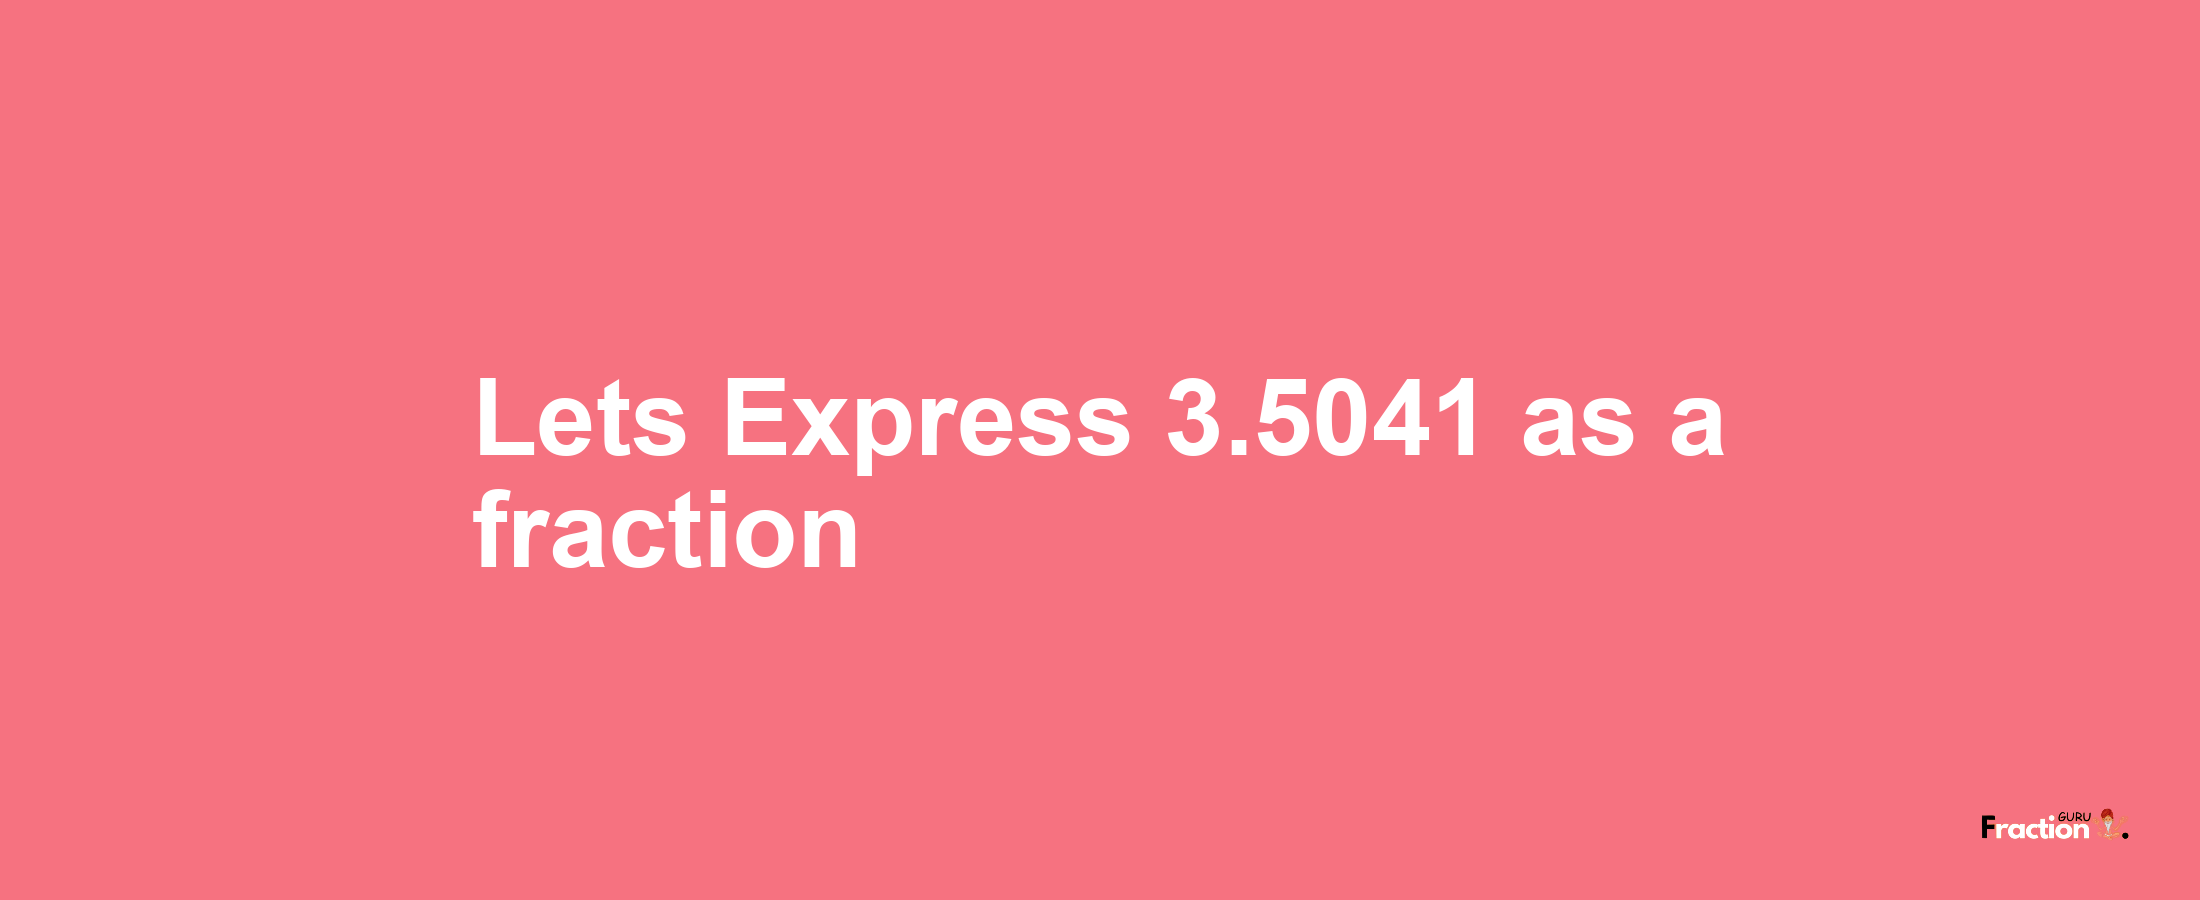 Lets Express 3.5041 as afraction